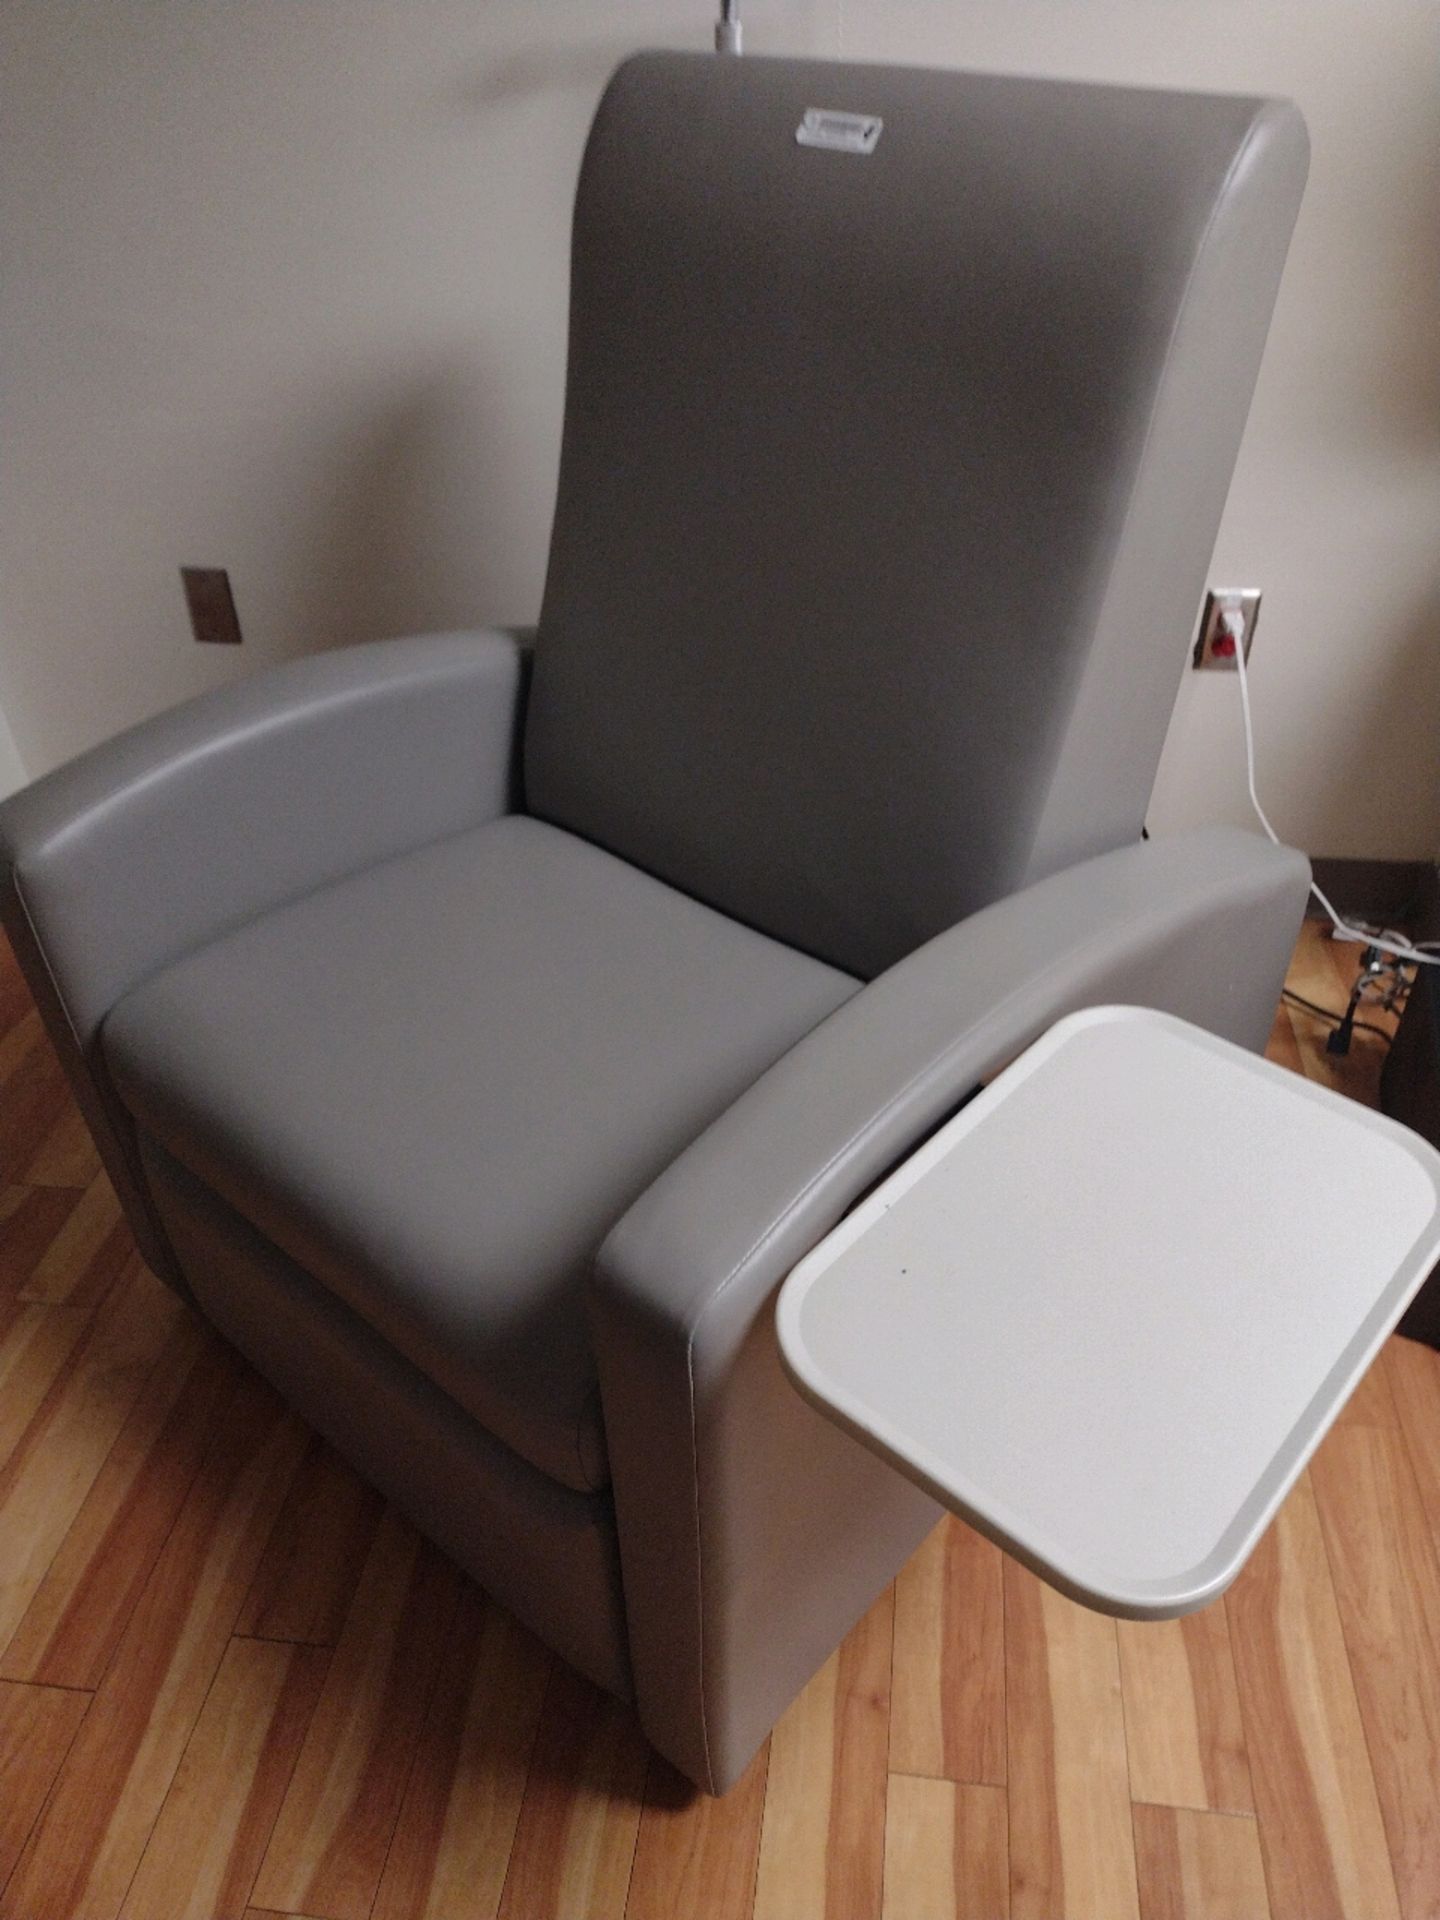 WINCO RECLINER CHAIR - Image 3 of 3